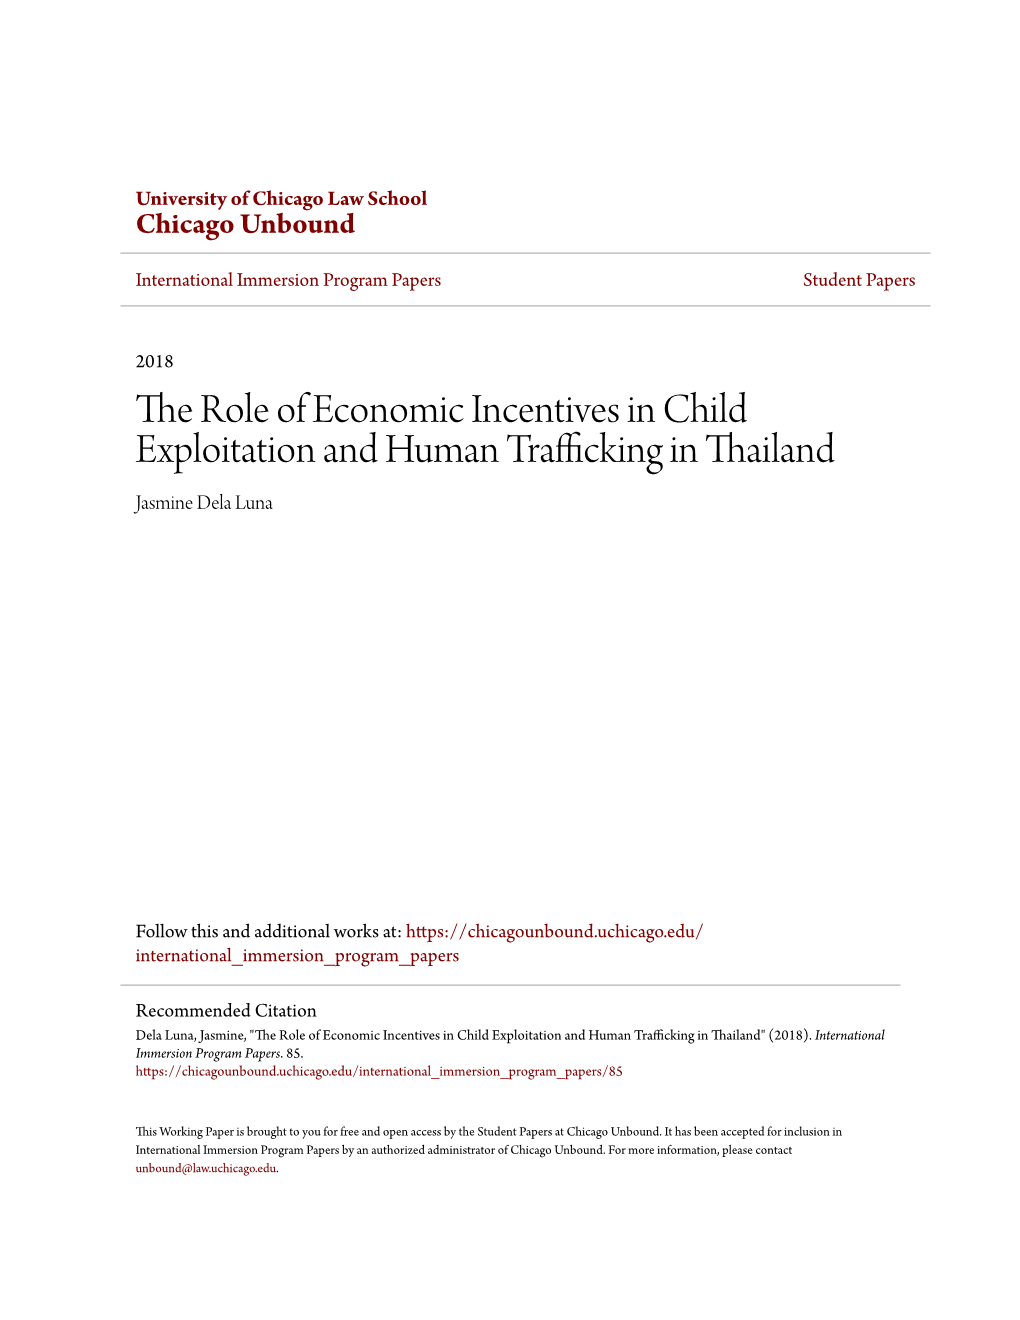 The Role of Economic Incentives in Child Exploitation and Human Trafficking in Thailand Jasmine Dela Luna